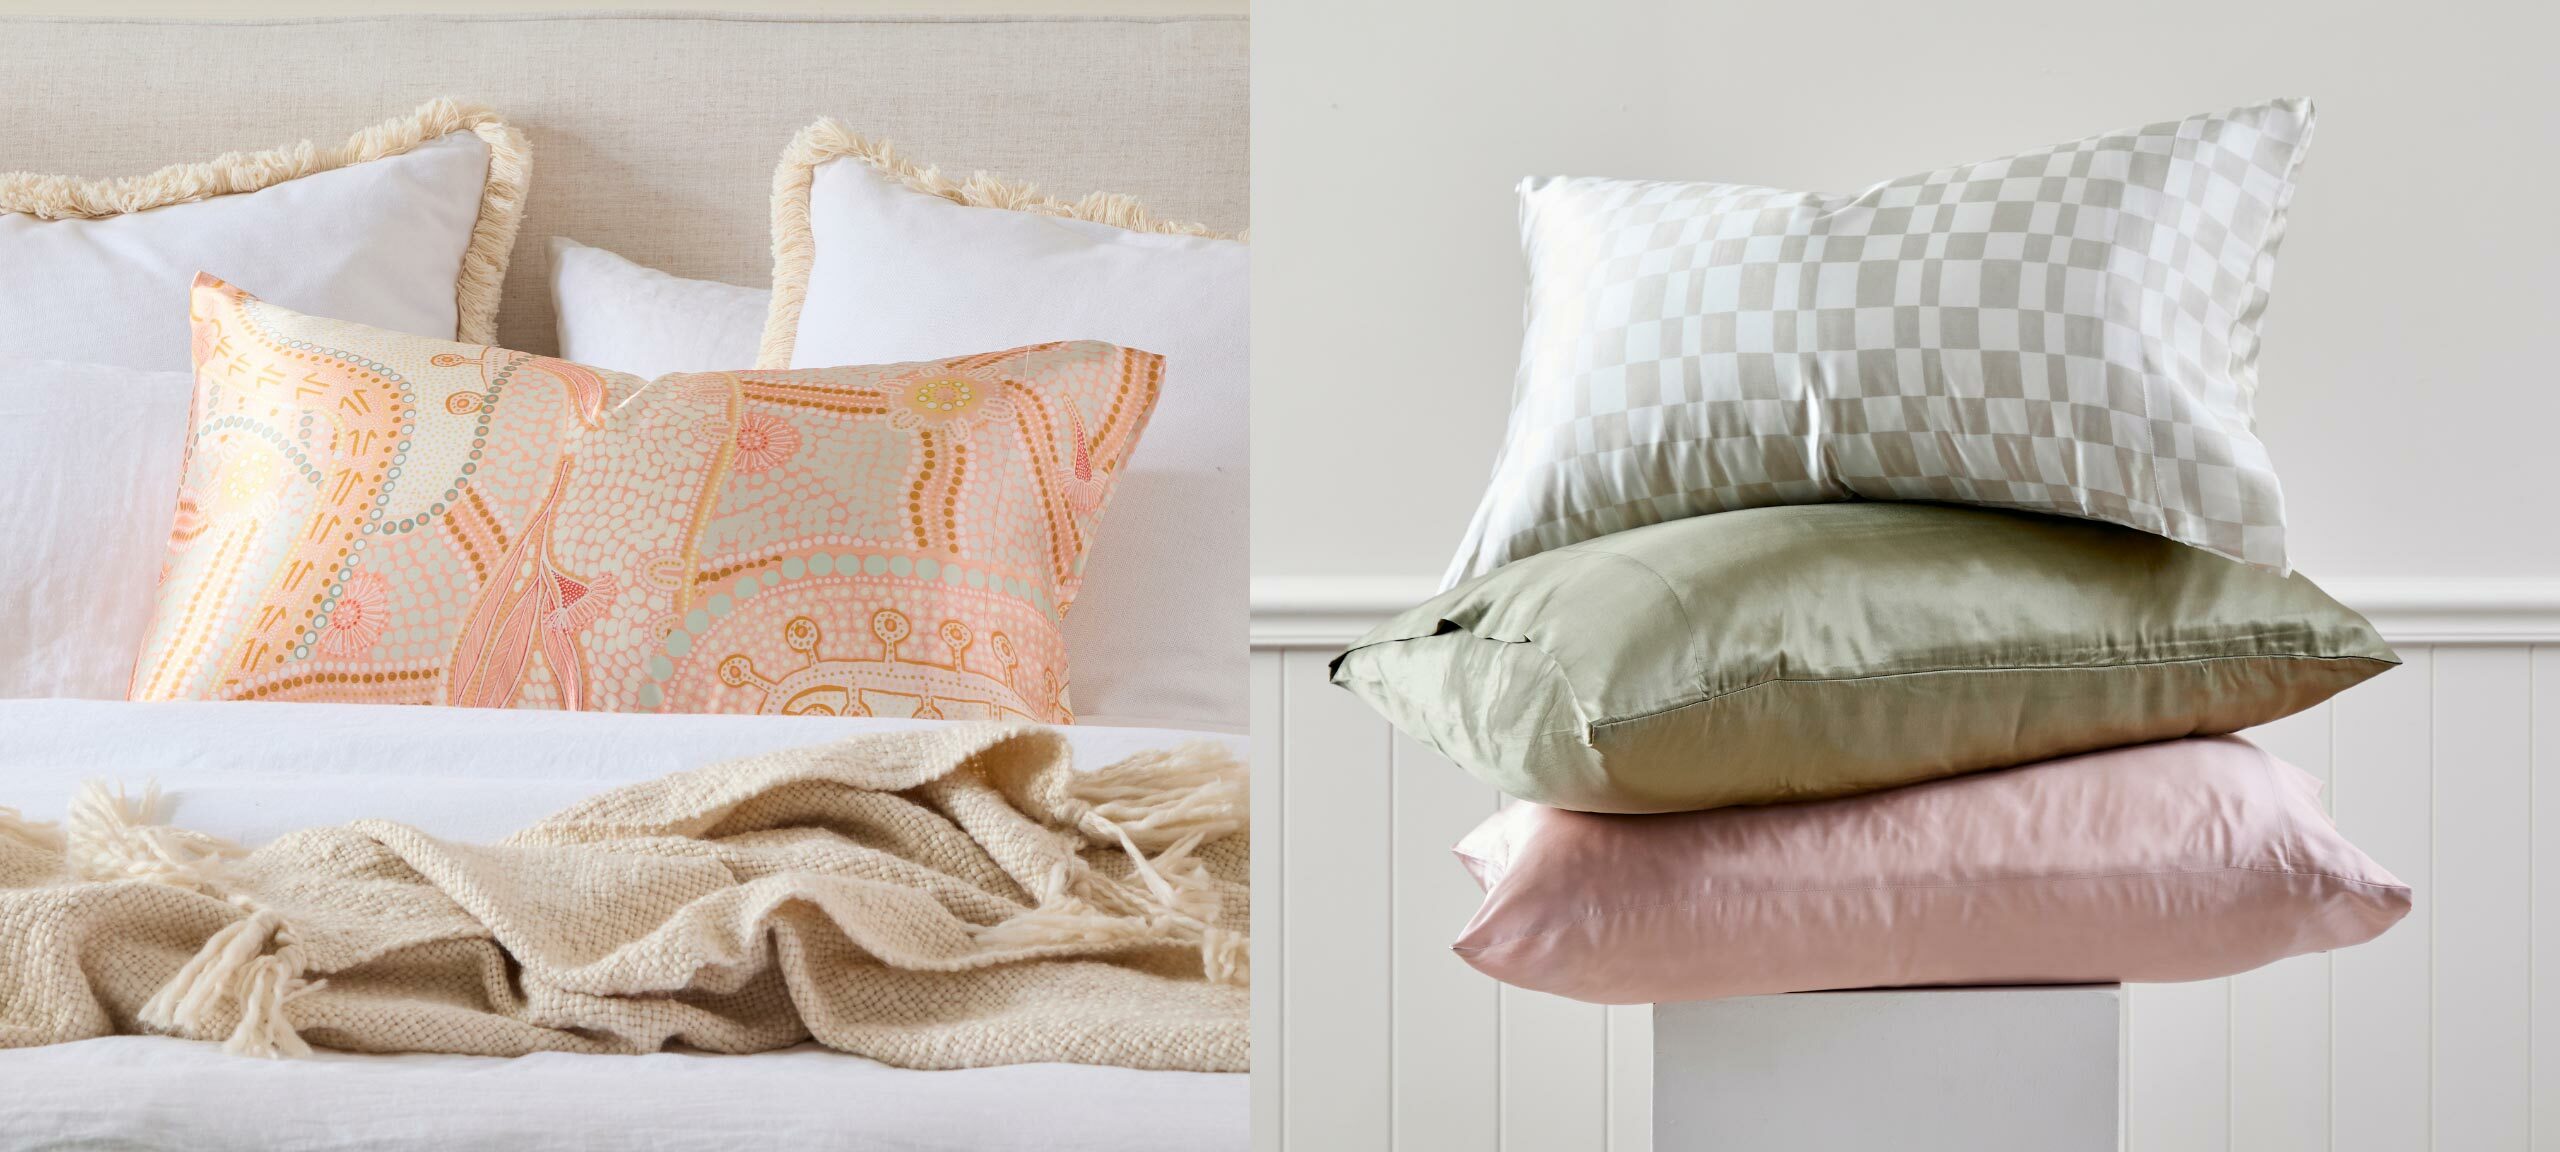 On the left, a picture of a pillow with a silk pillowcase featuring printed Australian Indigenous artwork sits on a bed with white and natural bedding. On the right, three pillows are stacked atop a pedestal. The top pillow has a checkered silk pillowcase, the middle pillow has a olive green silk pillowcase and the bottom pillow has a pink silk pillowcase. 